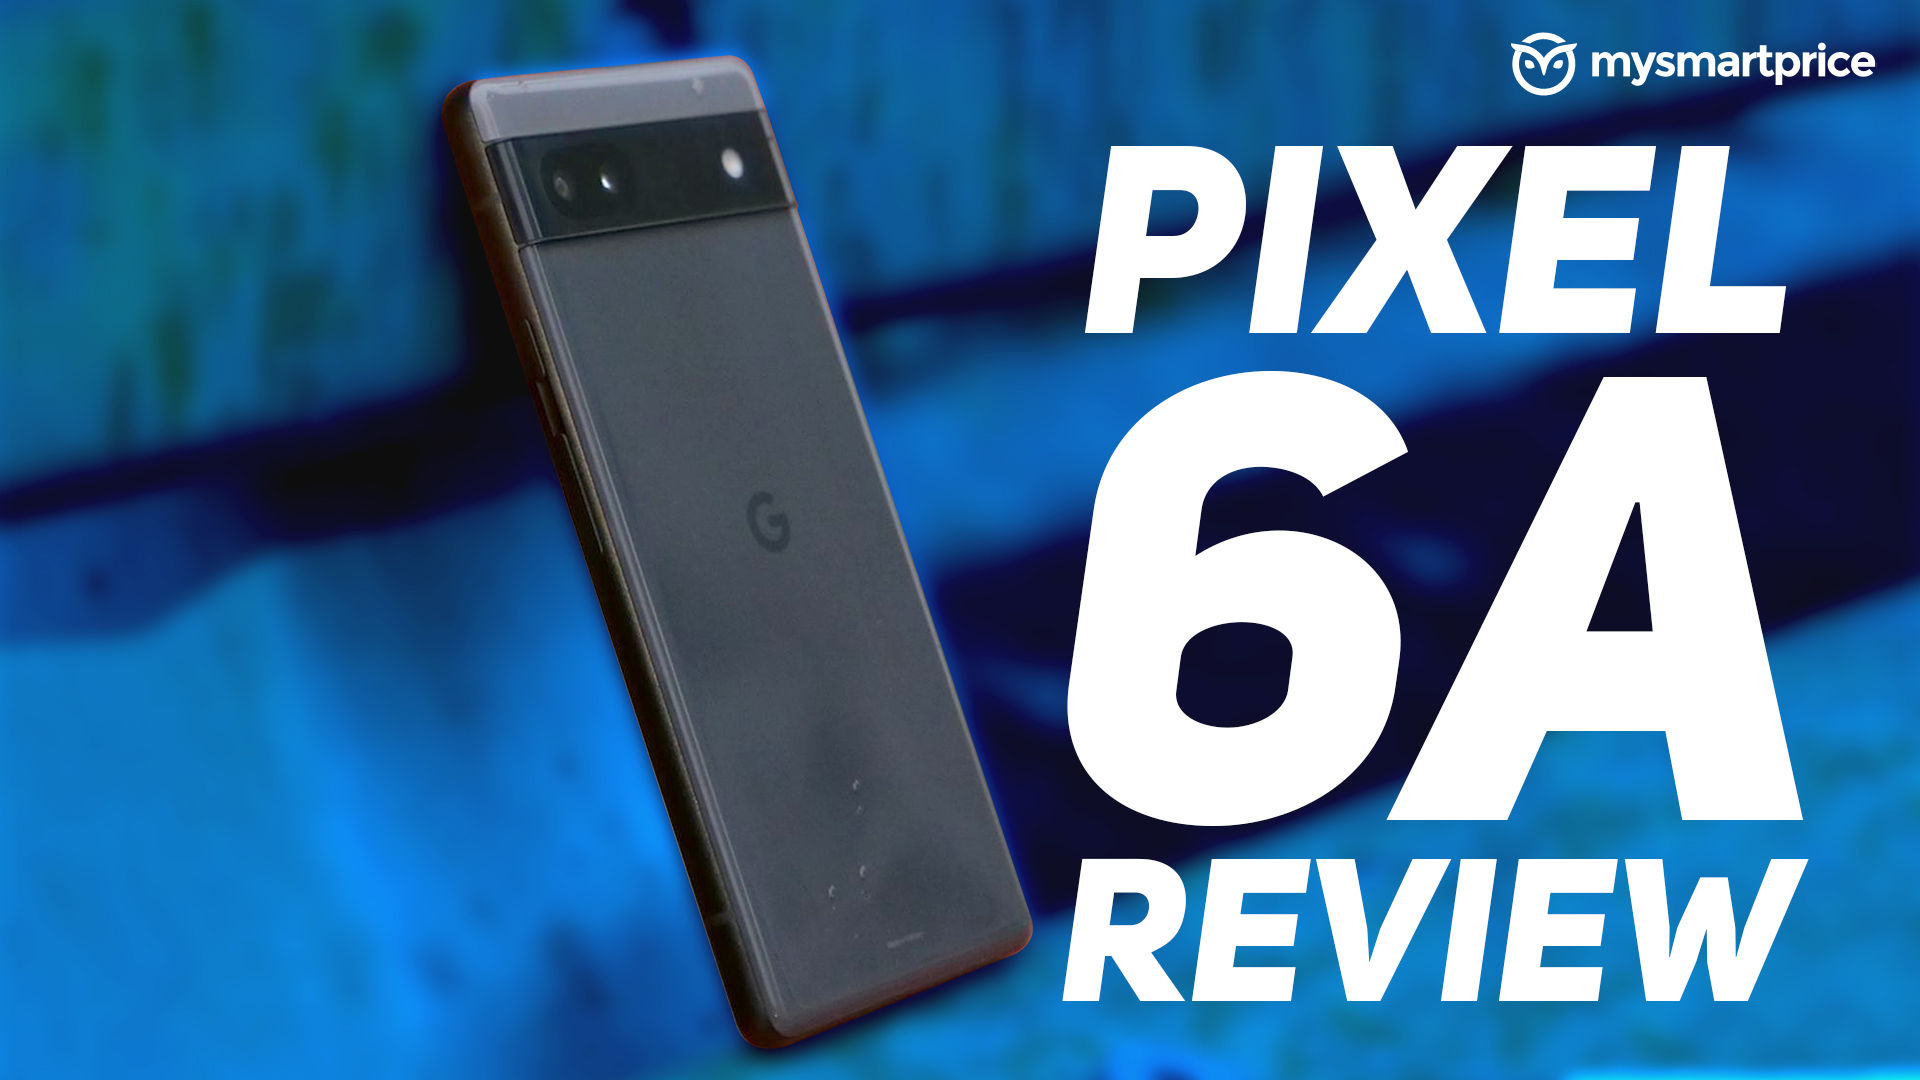 Pixel 6a Review An Excellent Pixel Phone, Even if No Longer a Game